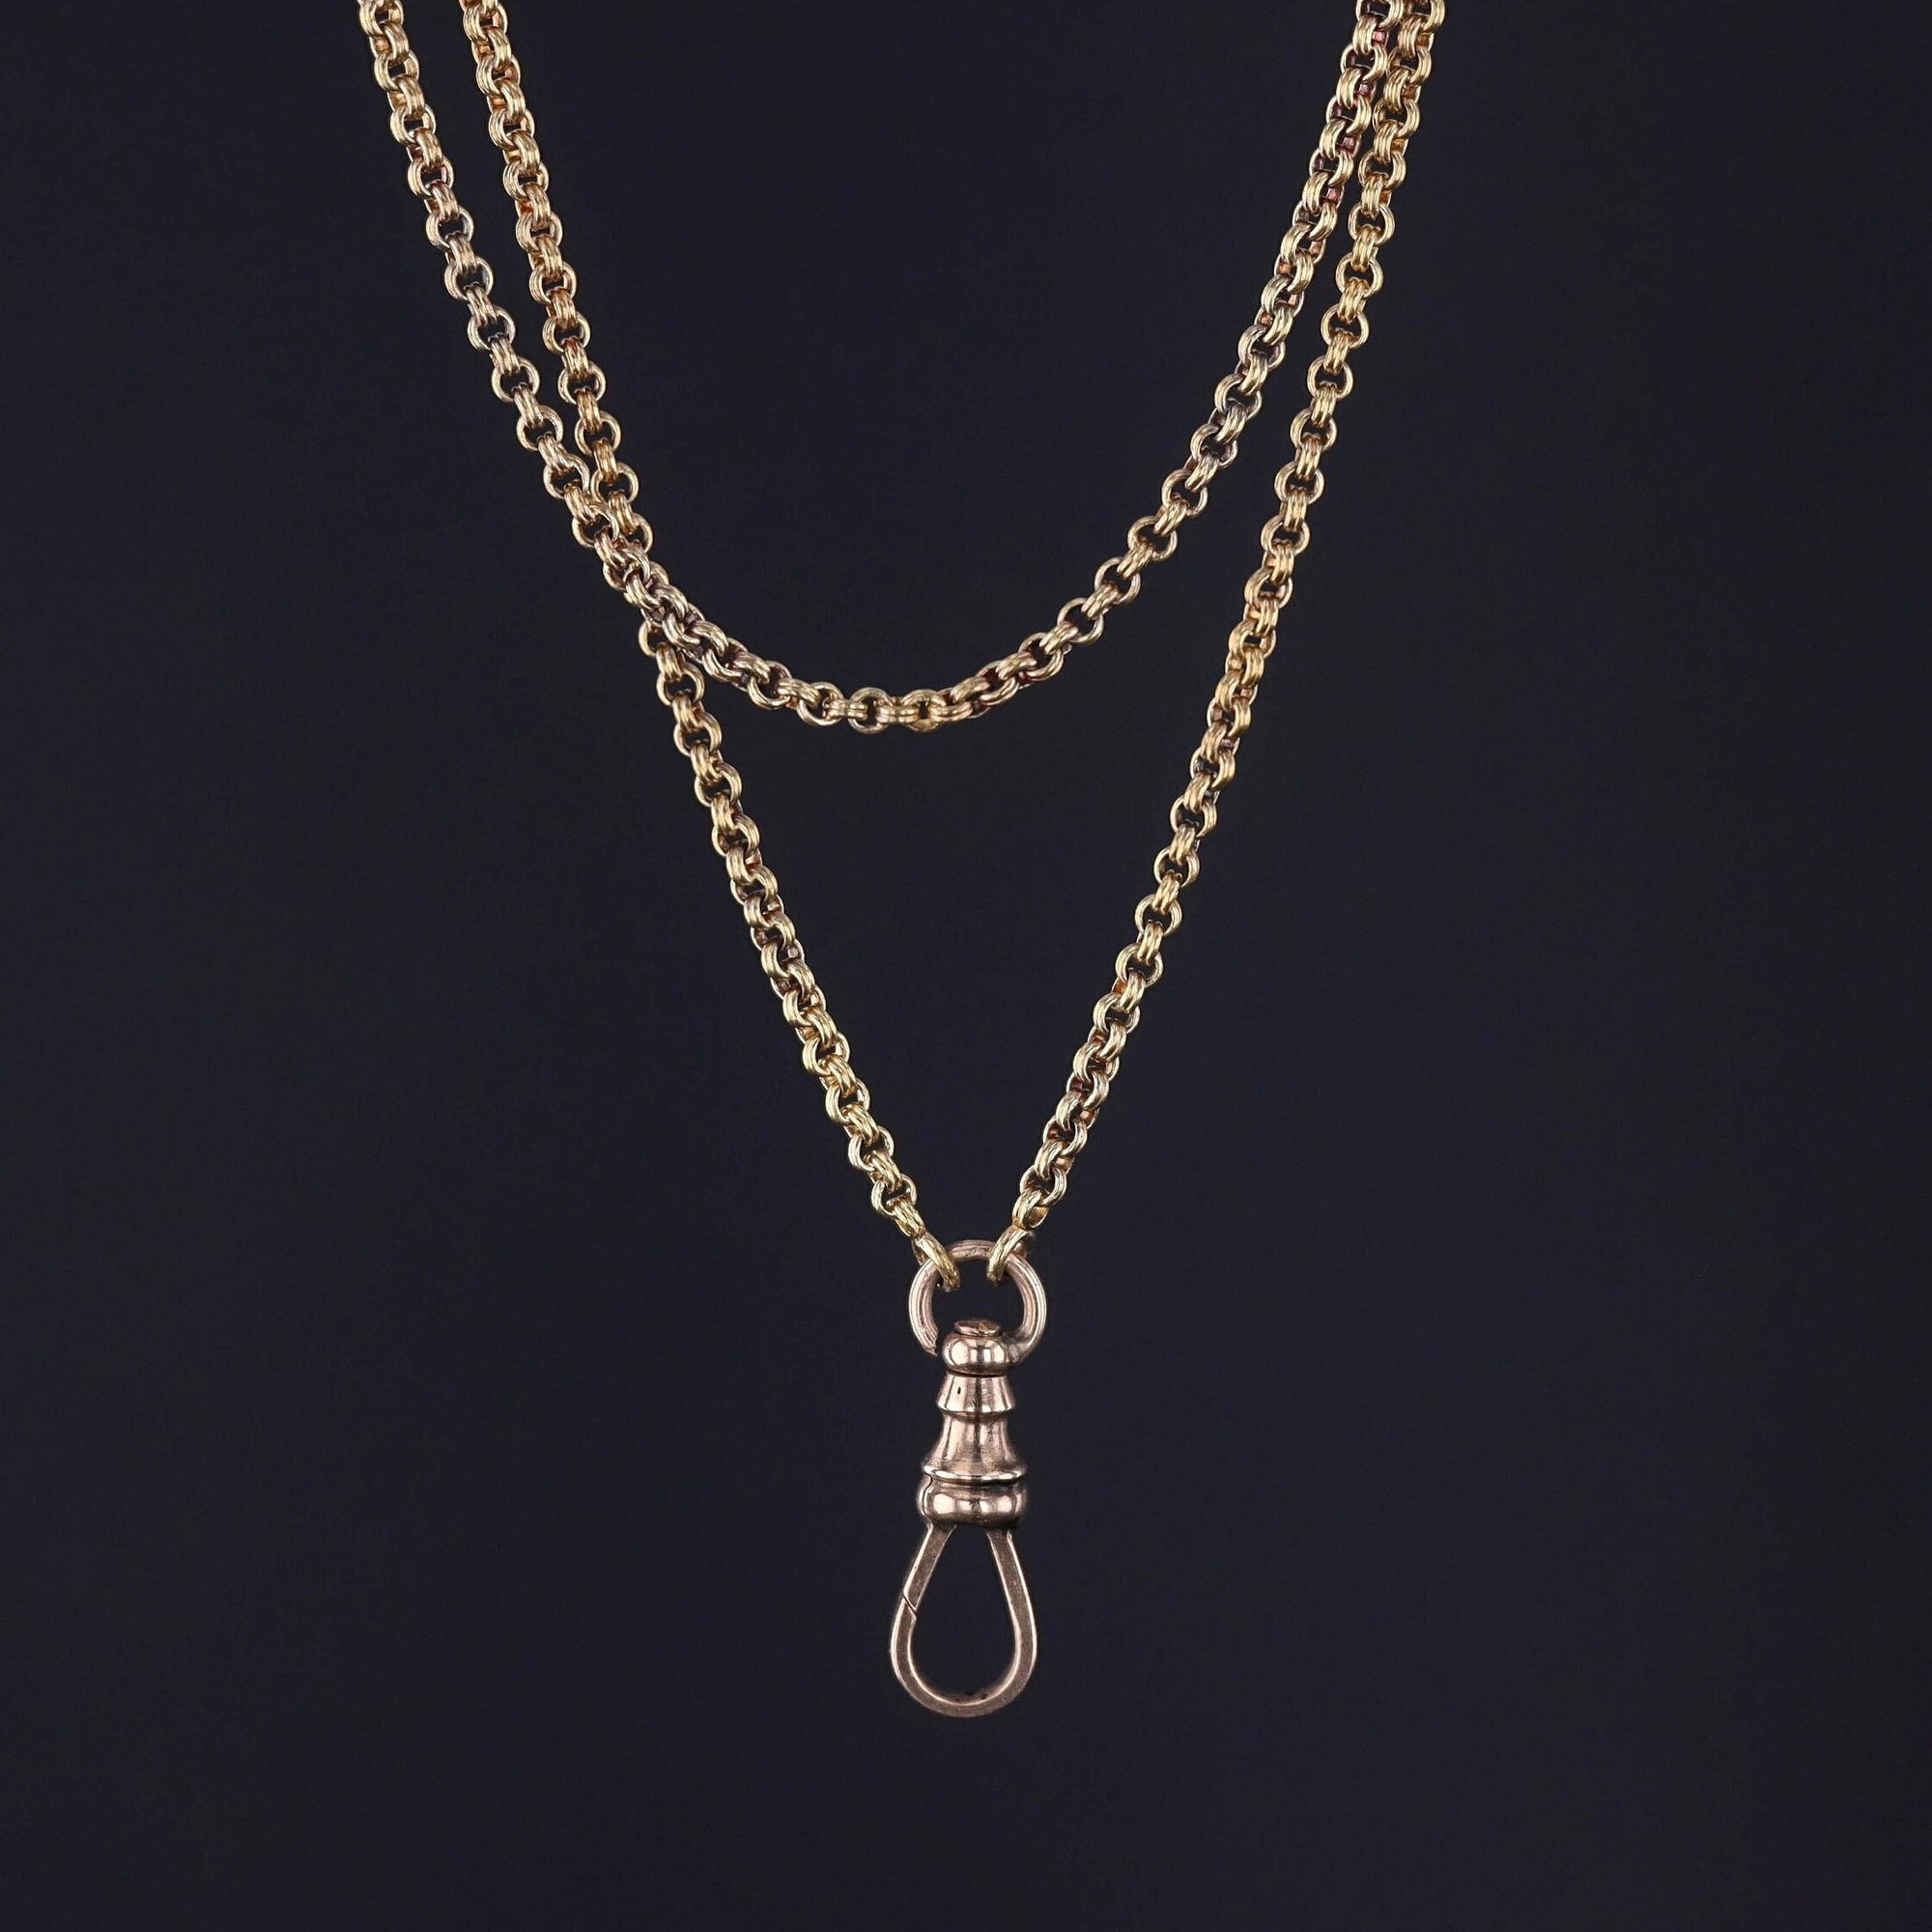 Antique Watch Chain of 18k Gold